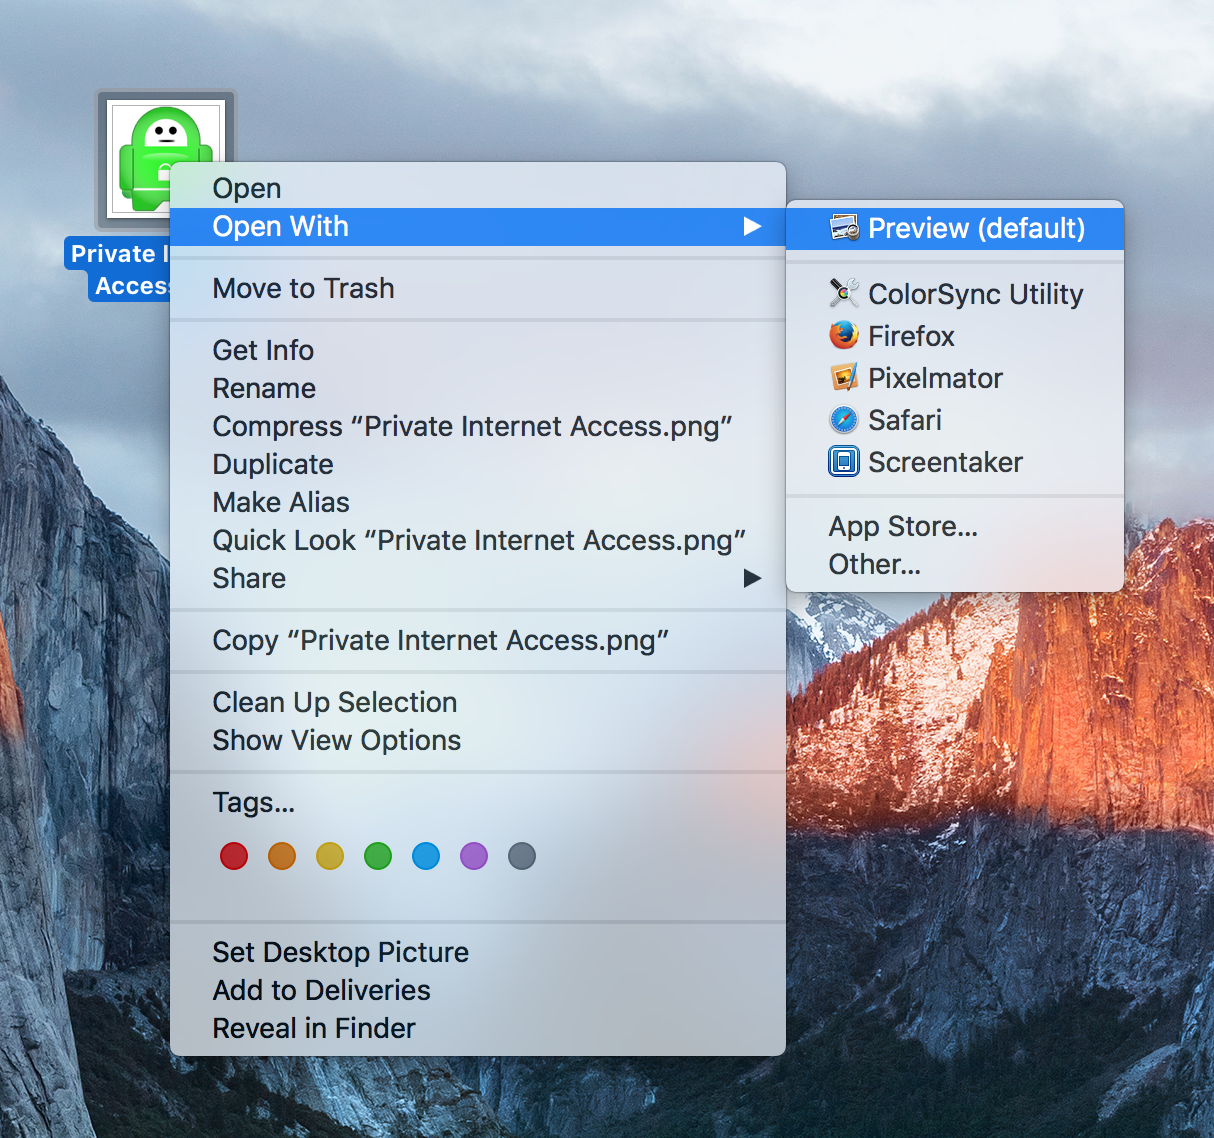 Open an image or app icon in Preview on Mac